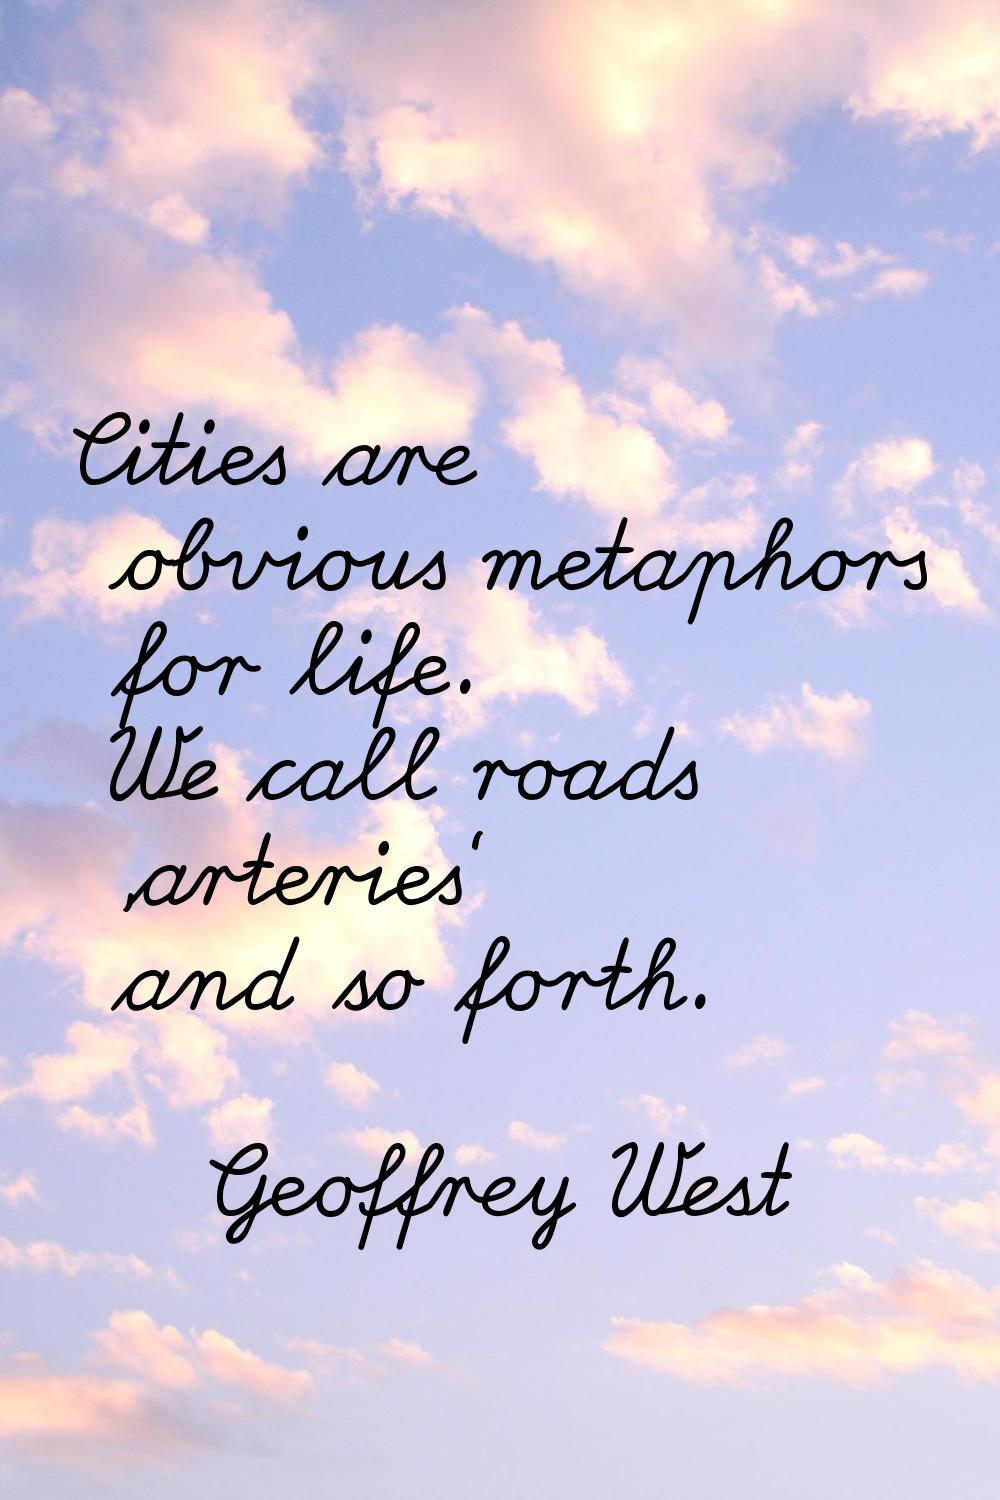 Cities are obvious metaphors for life. We call roads 'arteries' and so forth.